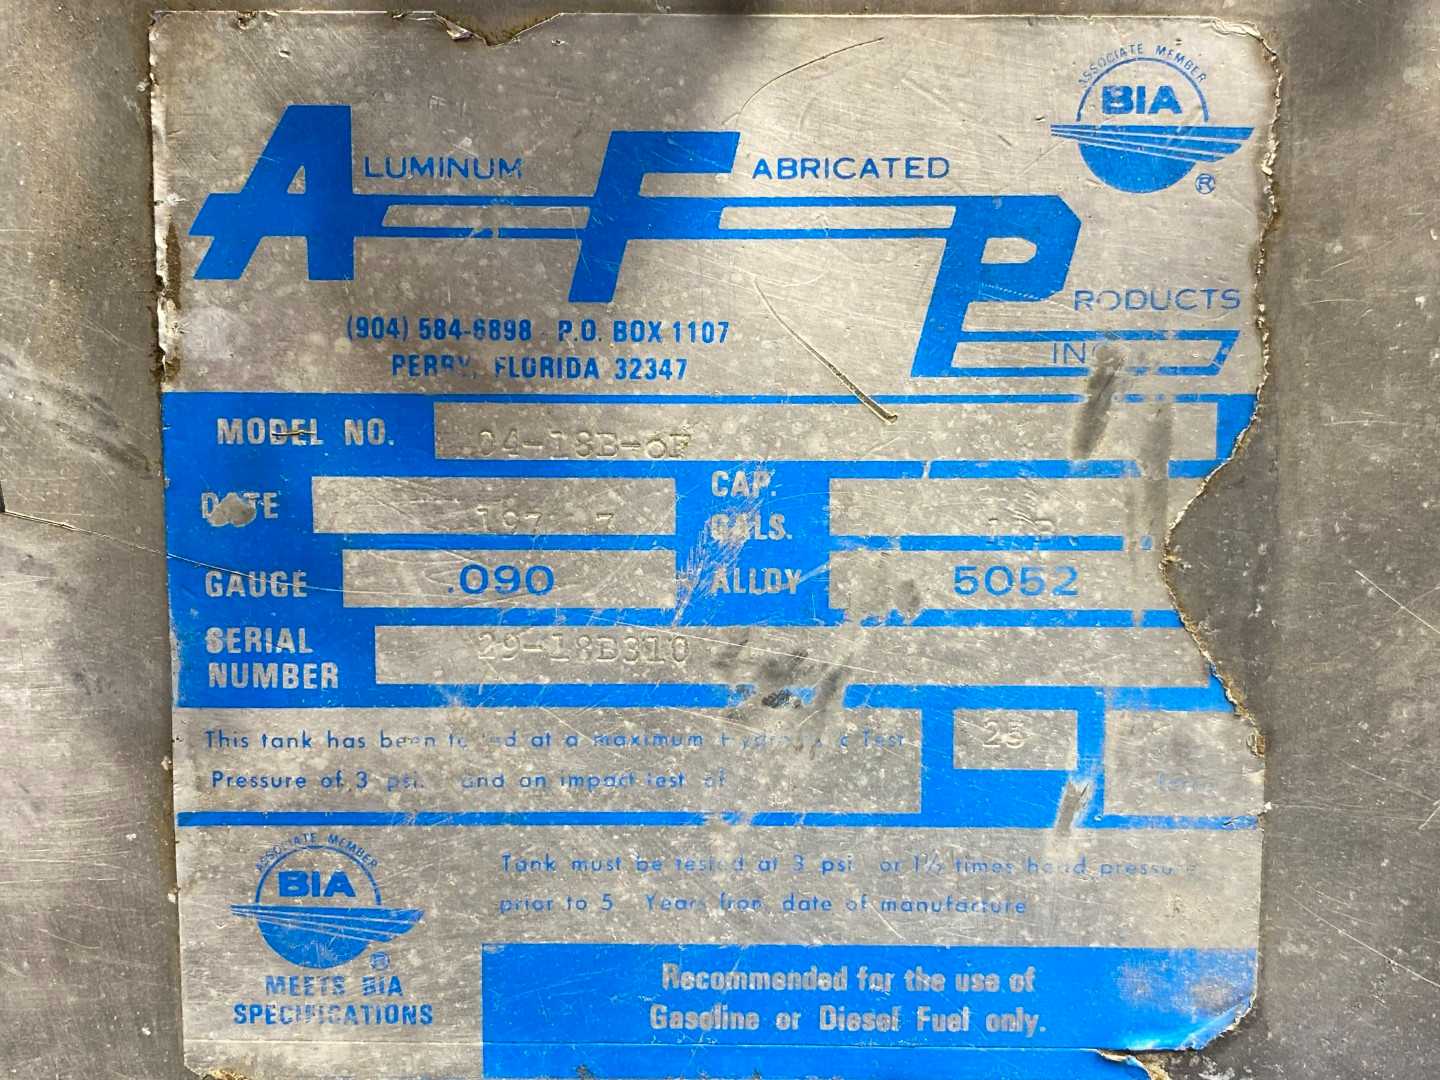 Fuel Tank AFP Aluminum Fabricated Products 04-18B-OF